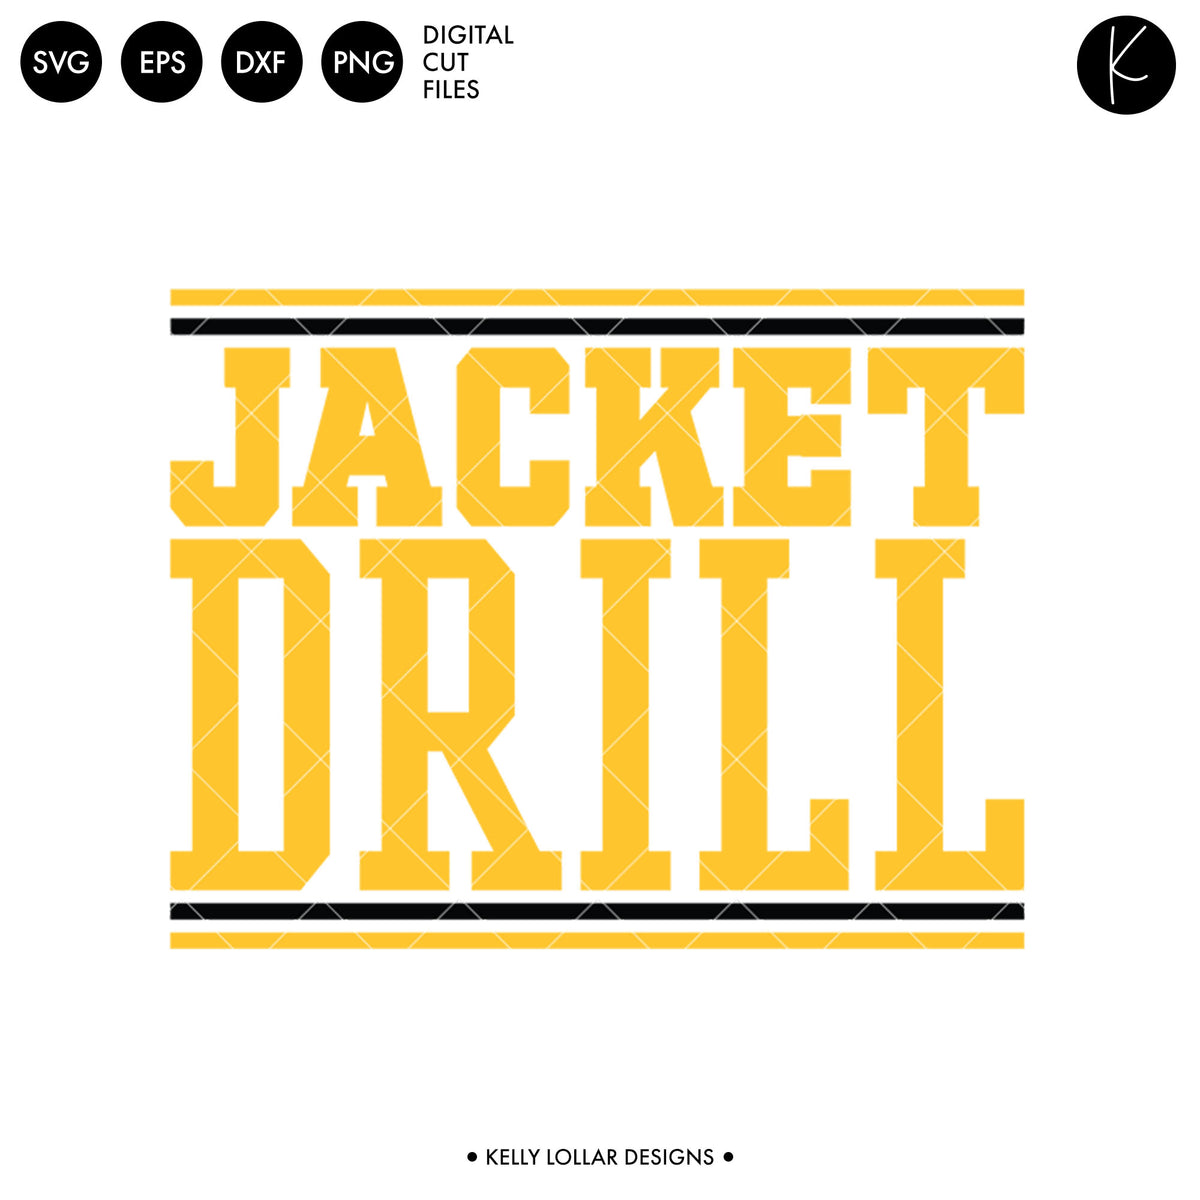 Jackets Drill Bundle | SVG DXF EPS PNG Cut Files